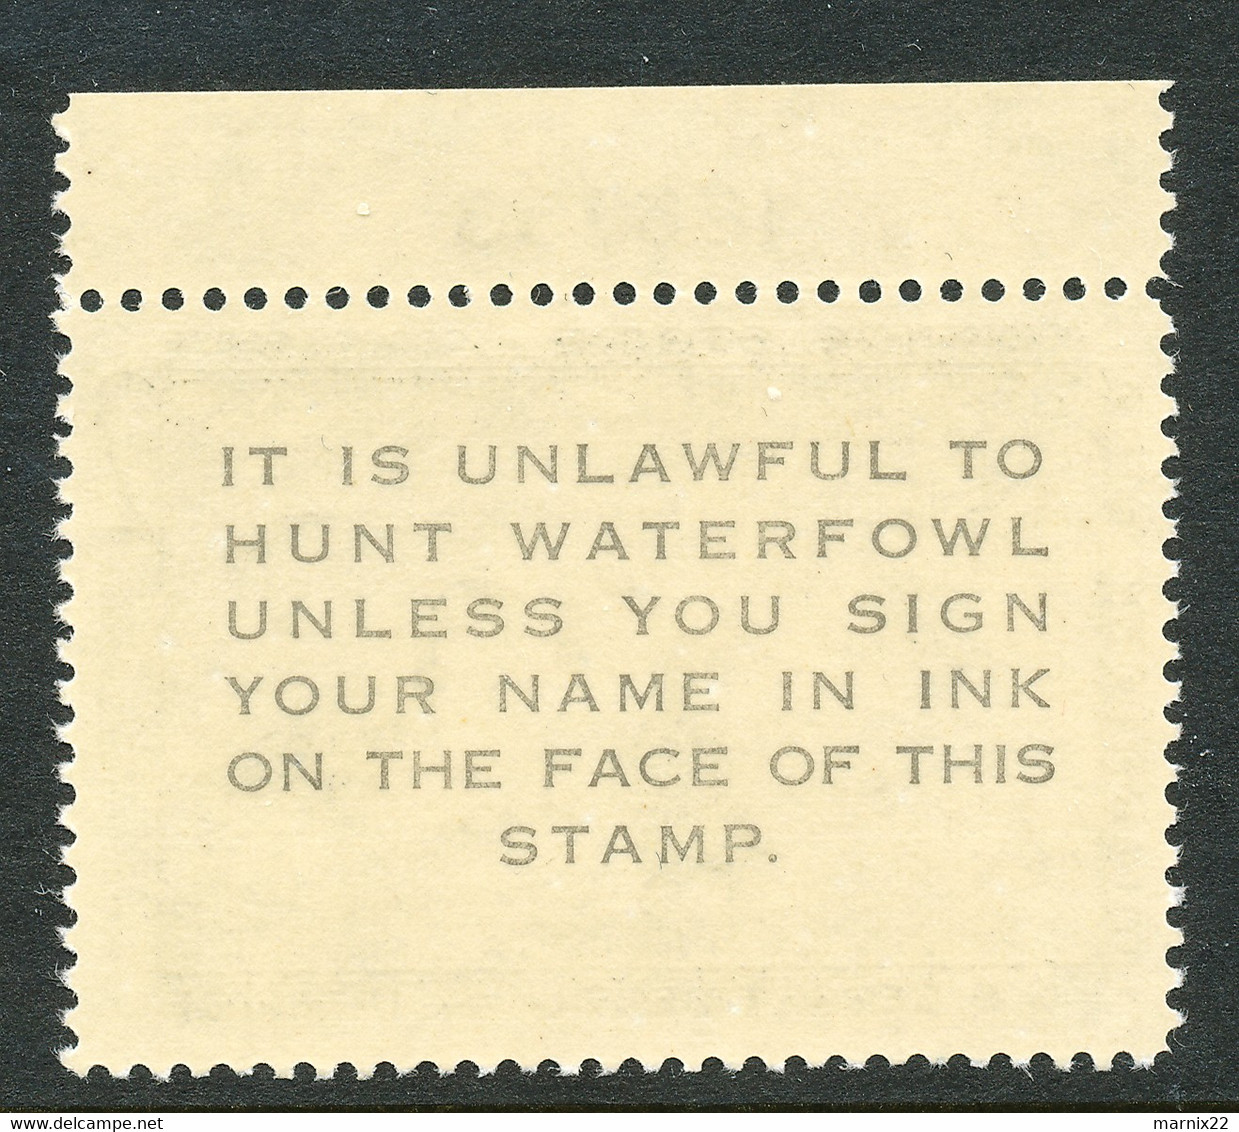 HUNTING PERMIT STAMP - DUCKSTAMP 1958 - MNH - (RW25) - Duck Stamps